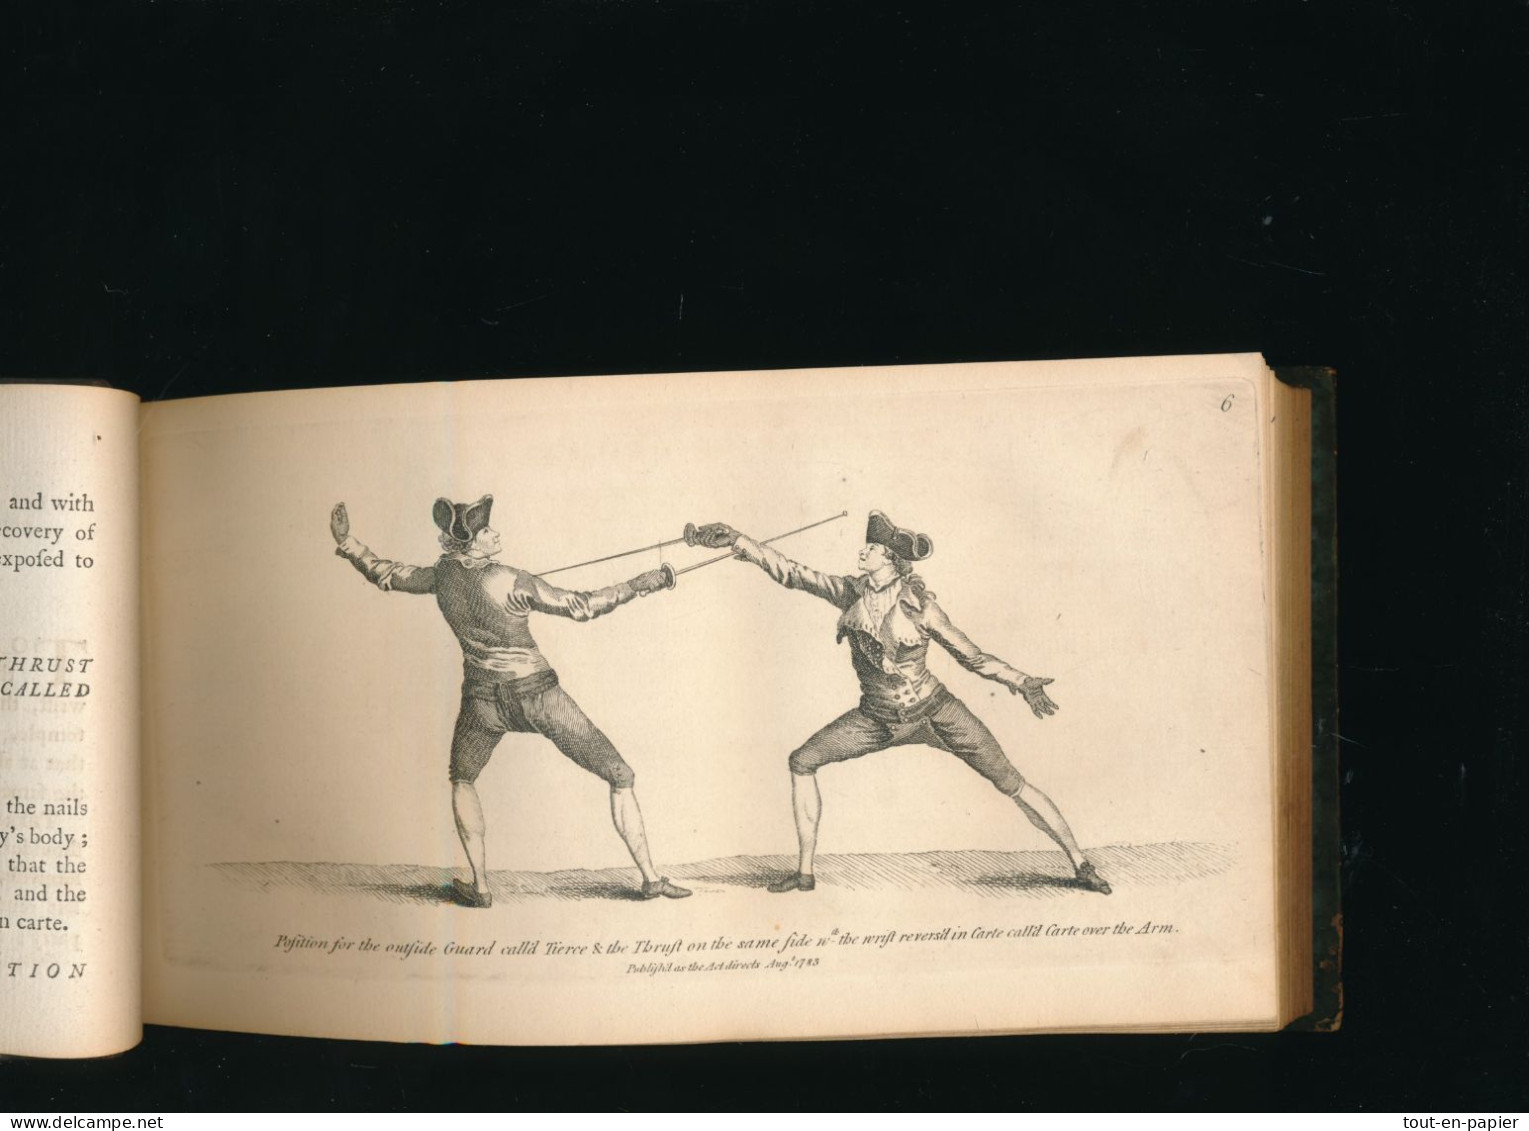 The School Of Fencing With A General Explanation Of The Principal Attitudes And Positions  - Angelo 1787 - Escrime - 1700-1799